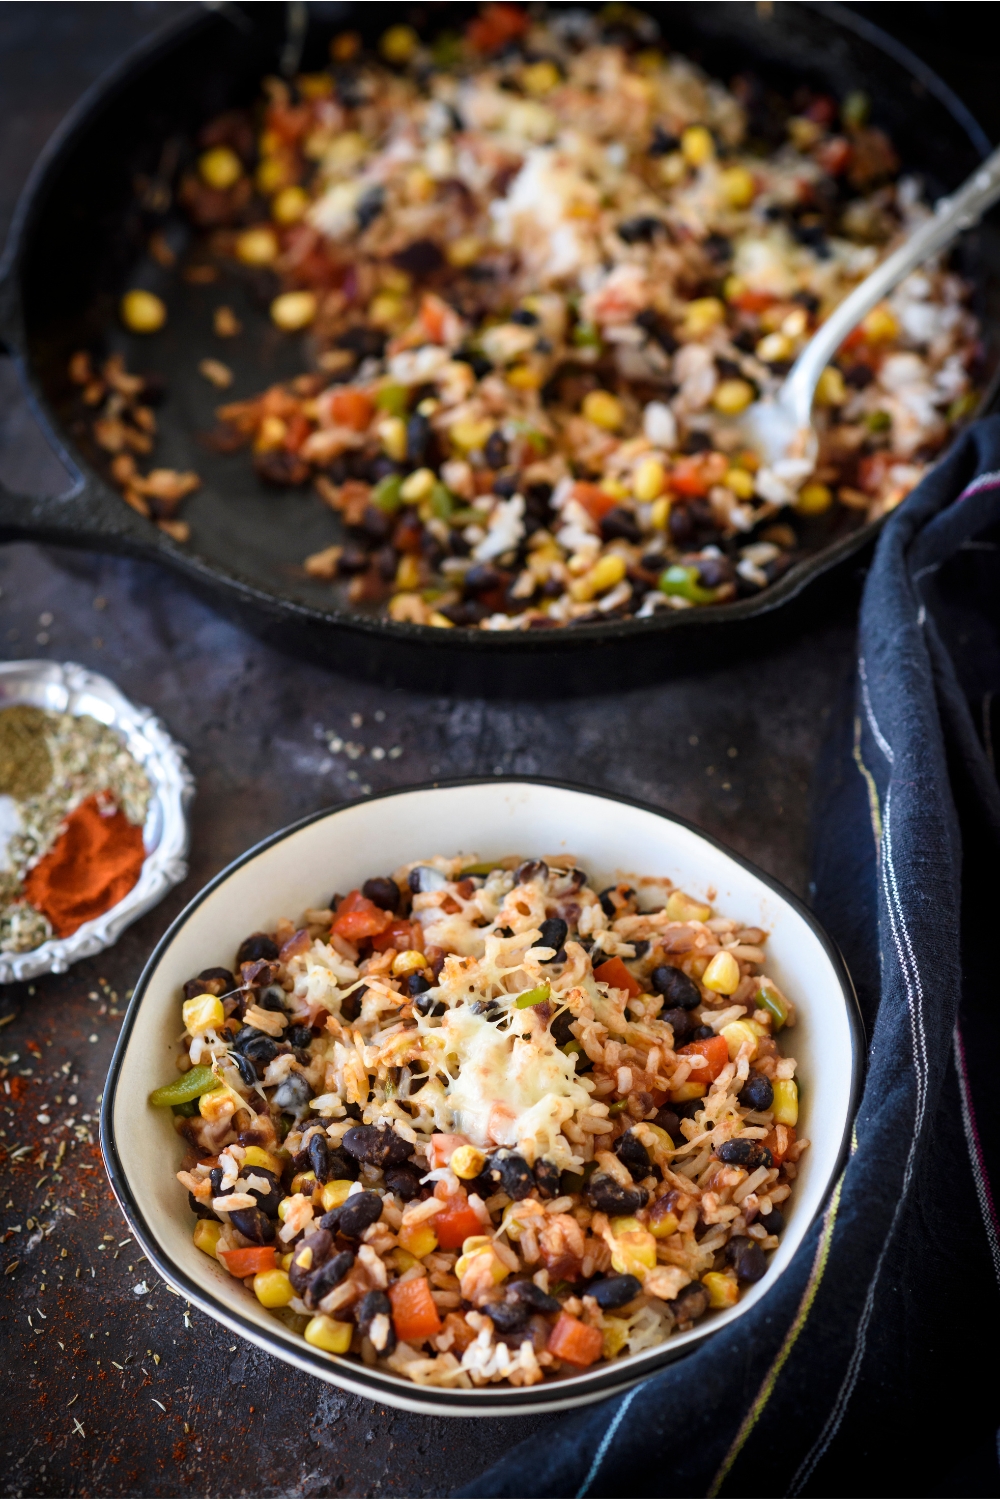 A bowl of rice casserole covered in melted cheese with visible chunks of vegetable, corn, and black beans. The rest of the rice casserole is in the background in a skillet.